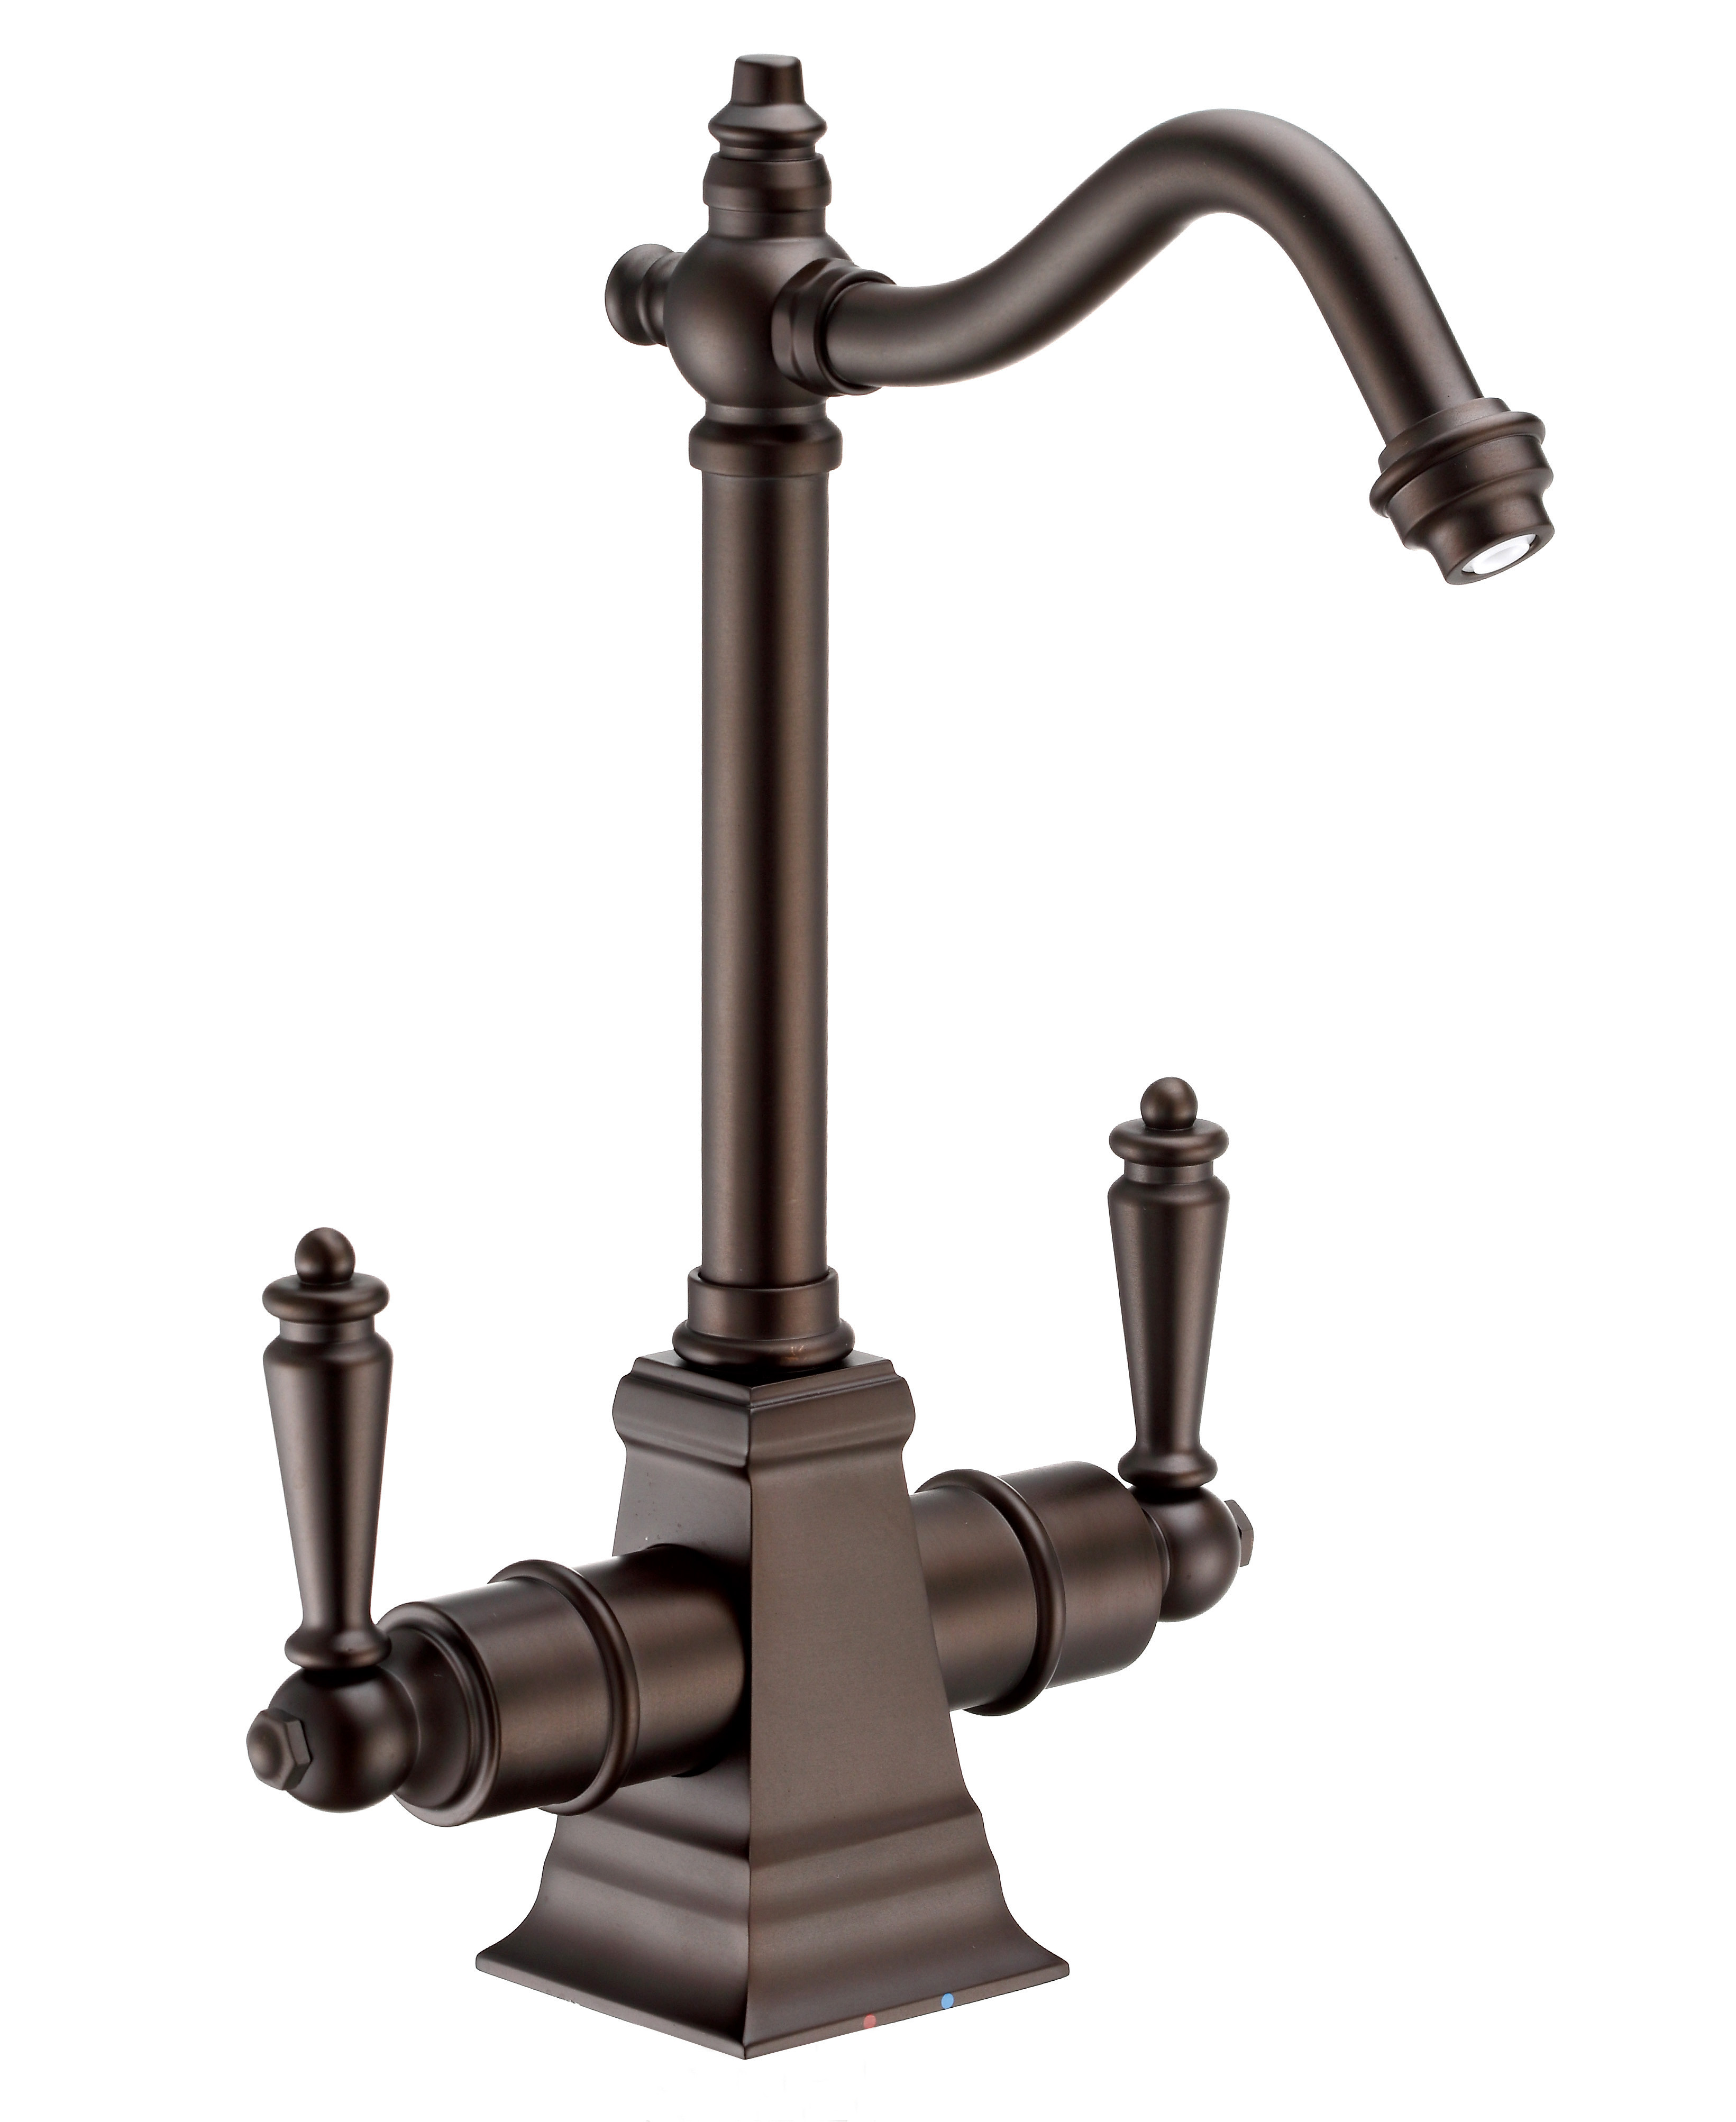 Whitehaus WHFH-HC2011-ORB Oil Rubbed Bronze Instant Hot/Cold Water Faucet with Traditional Spout